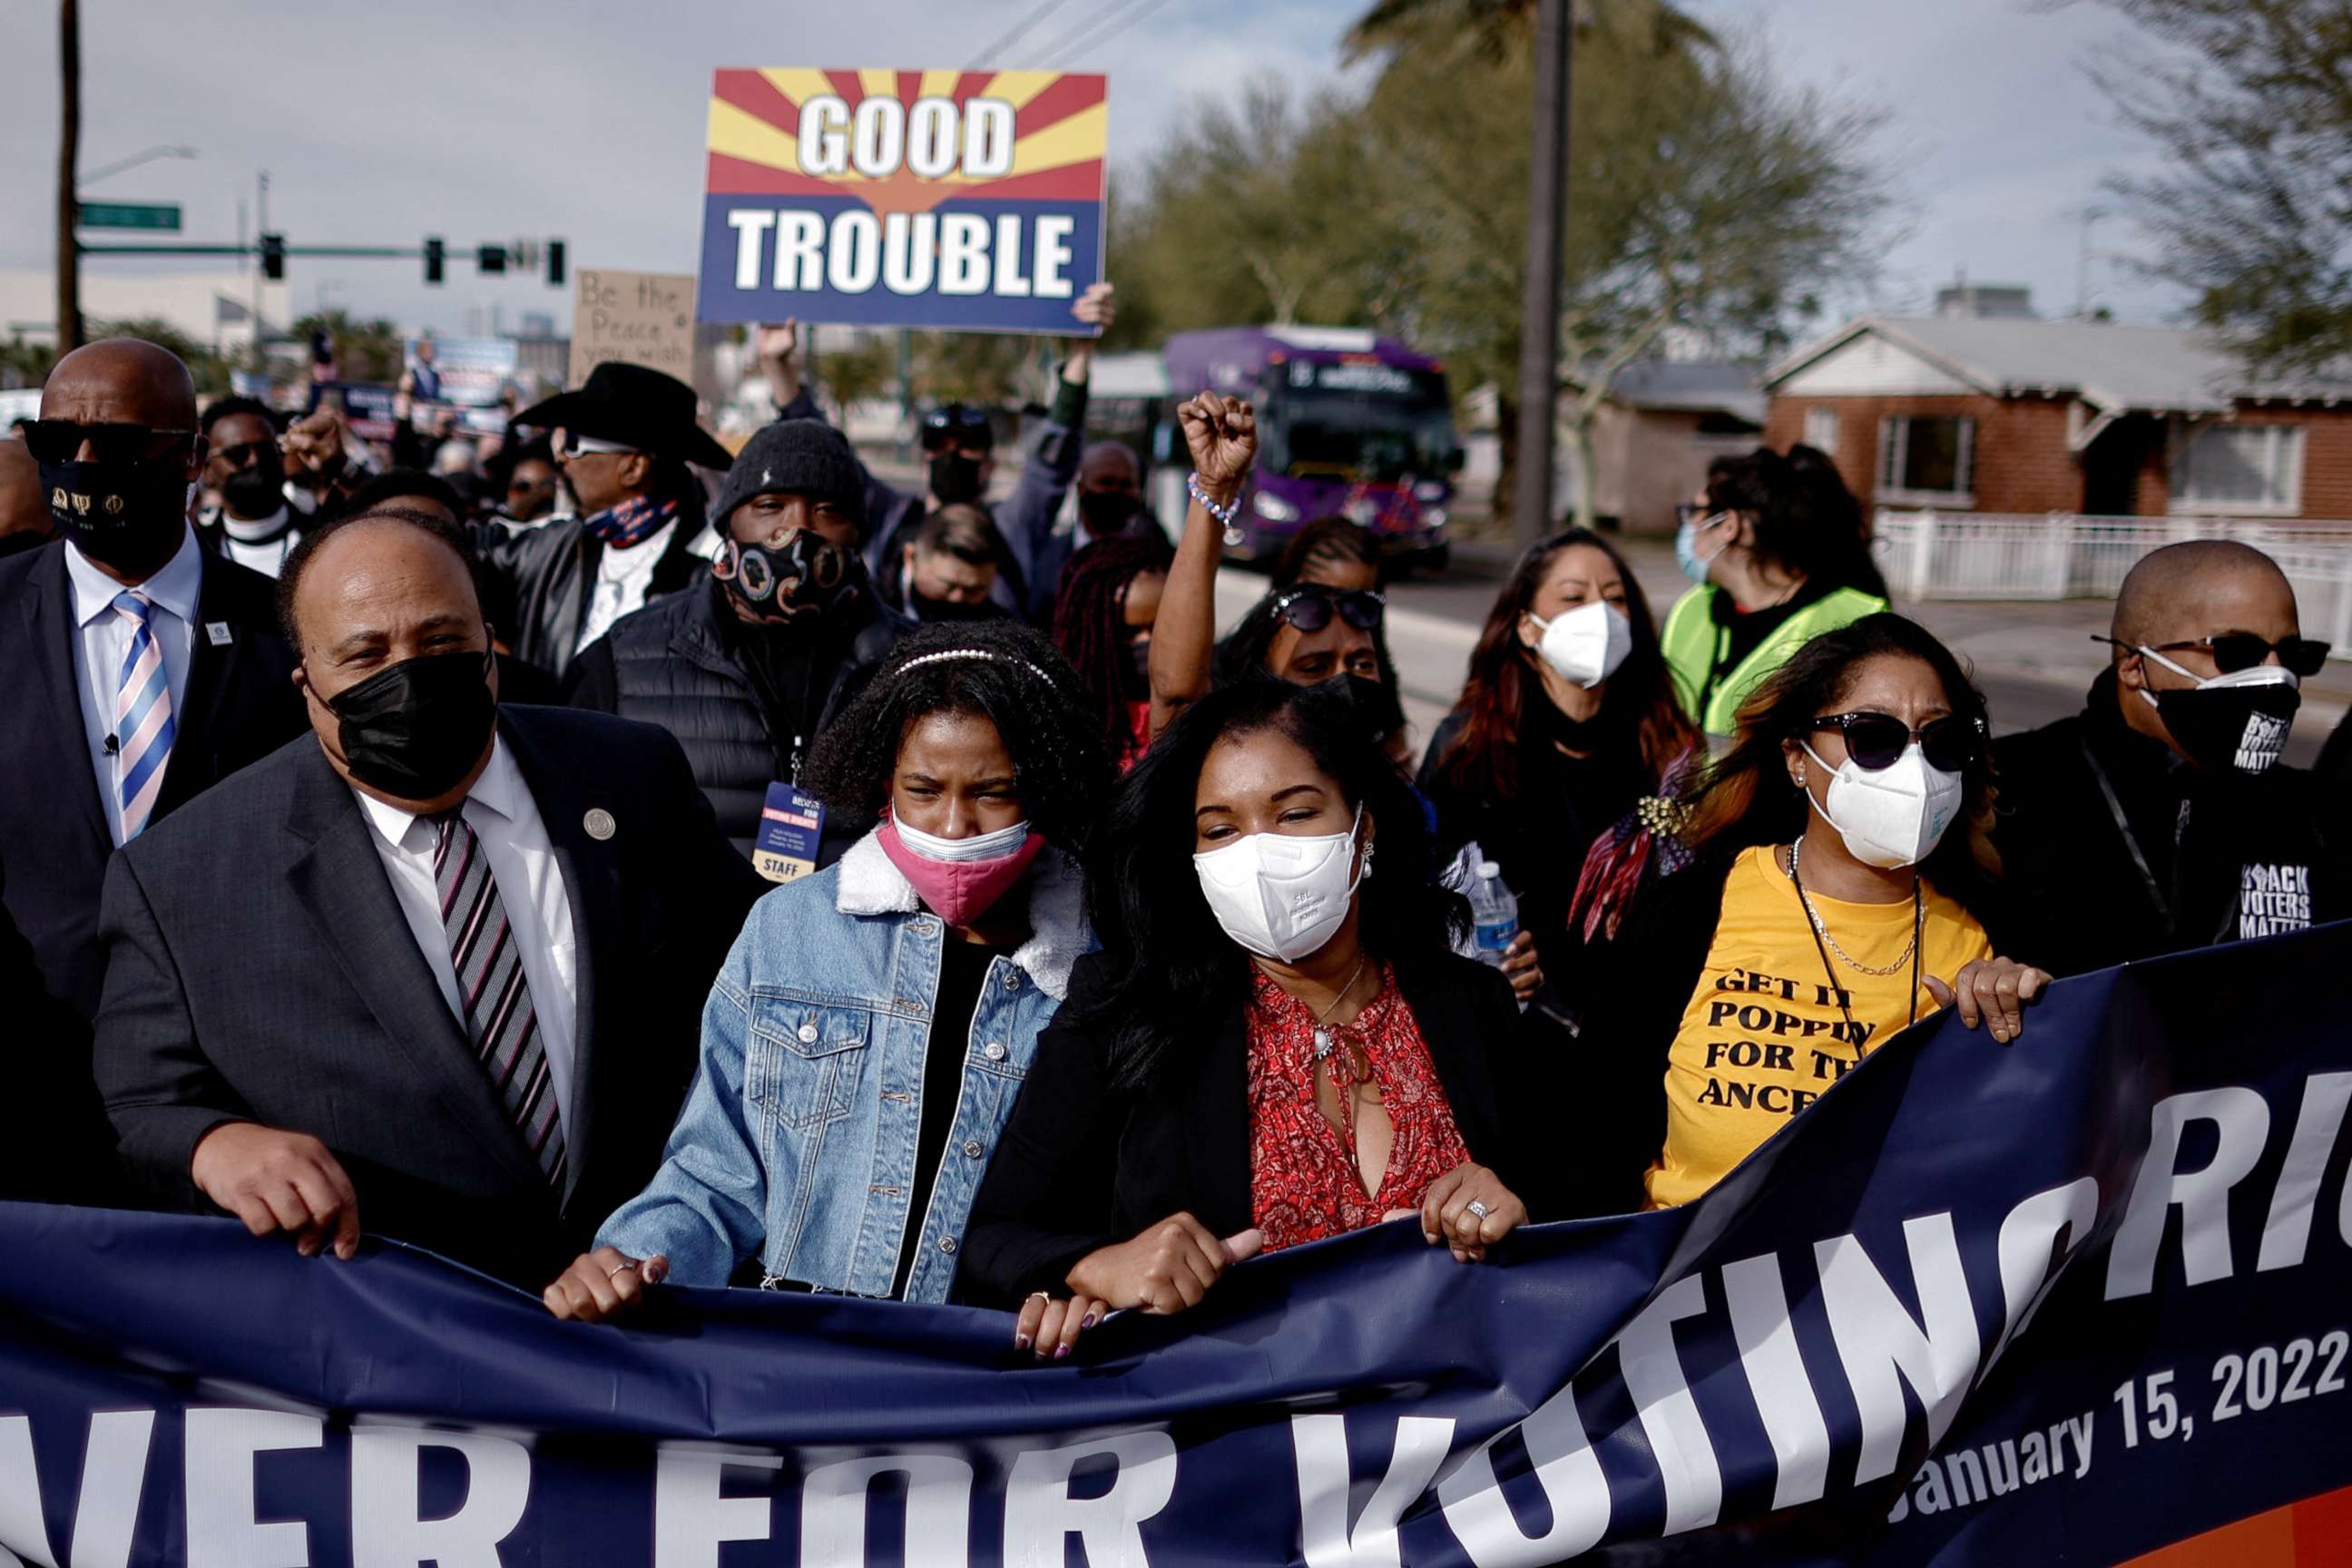 PHOTO: Martin Luther King III, the eldest son of the late civil rights activist Martin Luther King Jr., his daughter Yolanda Renee King, and wife Arndrea Waters King attend a demonstration to press for voting rights in Phoenix, Jan. 15, 2022.